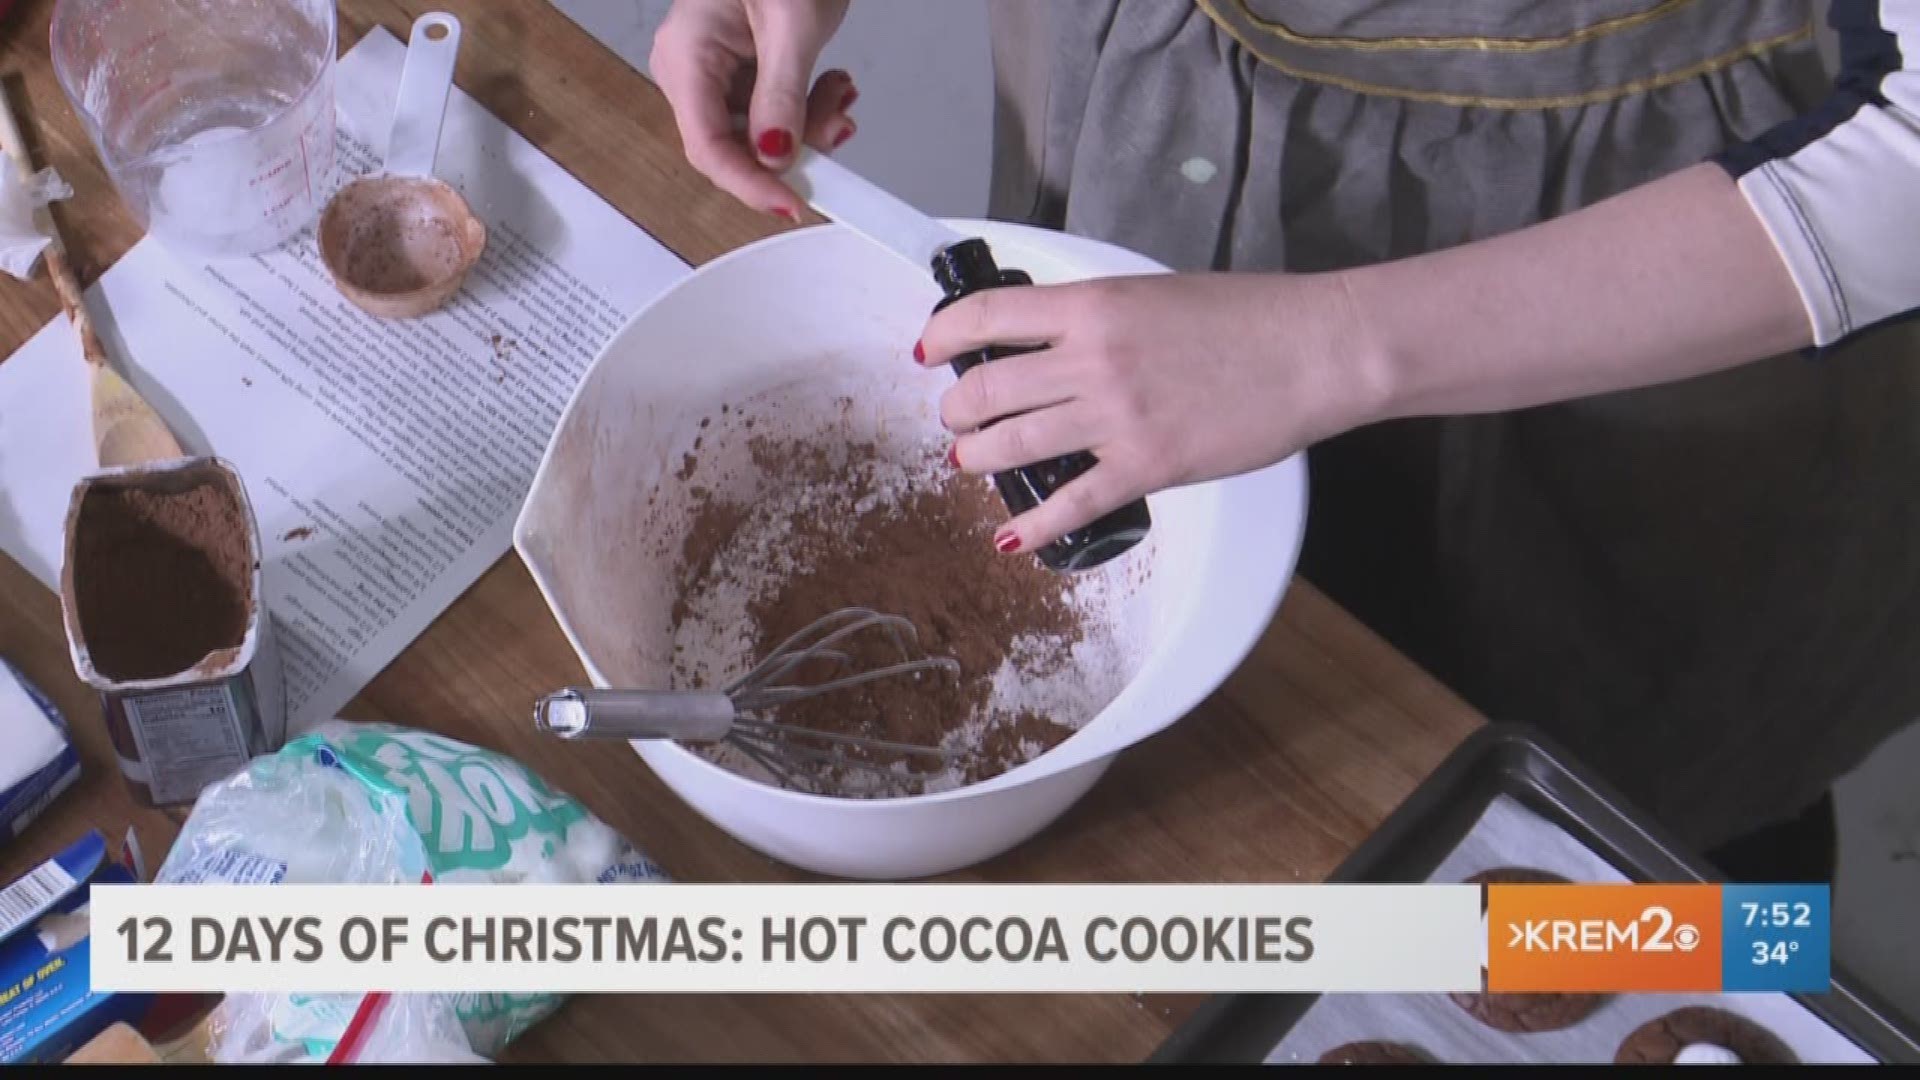 Brittany Bailey whips up another holiday treat. She's walking us through everything to help avoid baking fiascos.